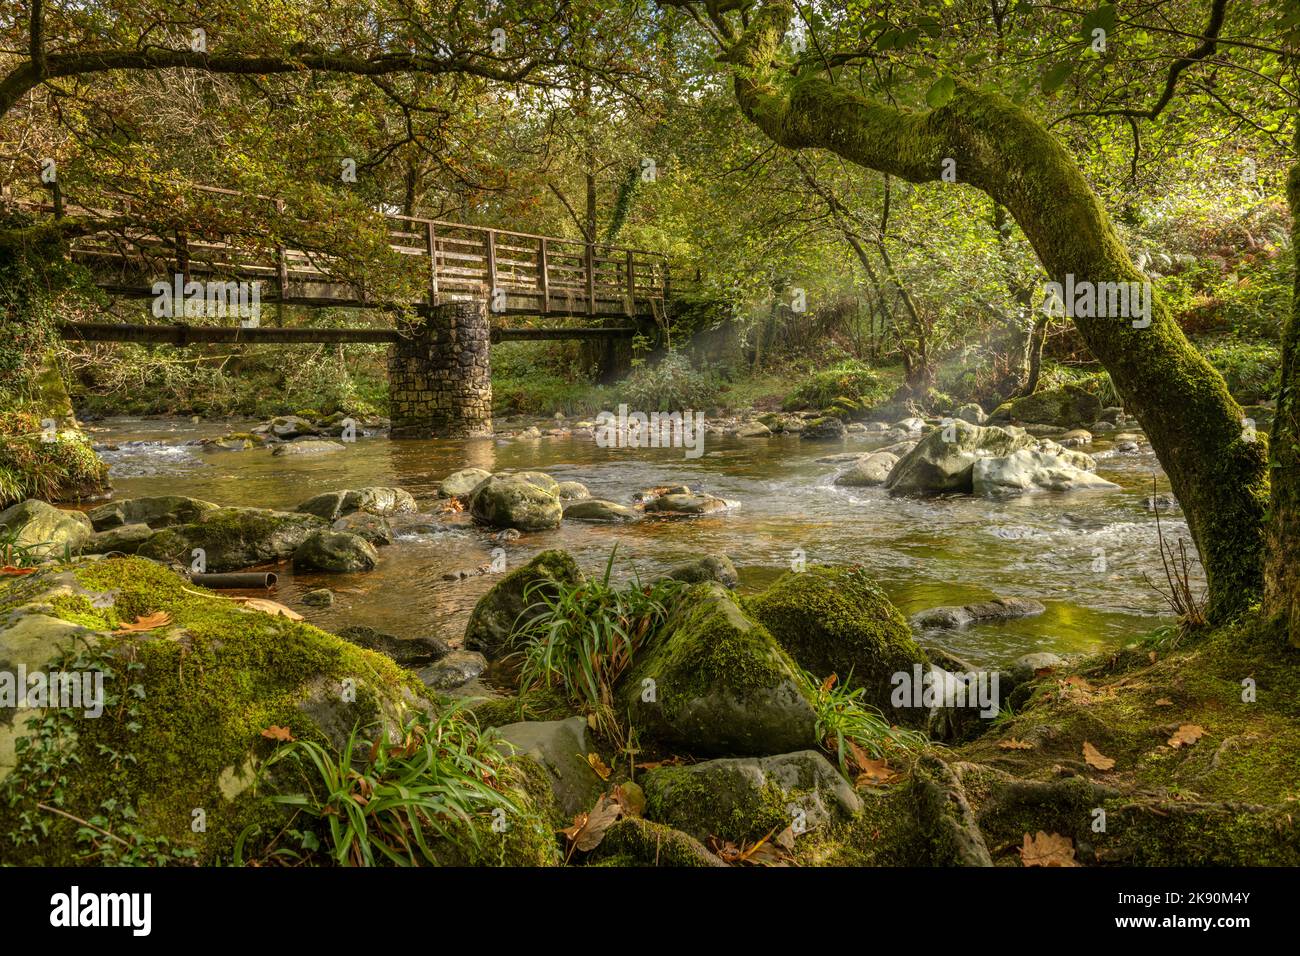 The River Tavy, Dartmoor, Devon, England. Tuesday 25th October 2022. On a day of sunshine and heavy showers, the sun breaks through the trees along the River Tavy on the edge of Dartmoor National Park in Devon. Credit: Terry Mathews/Alamy Live News Stock Photo